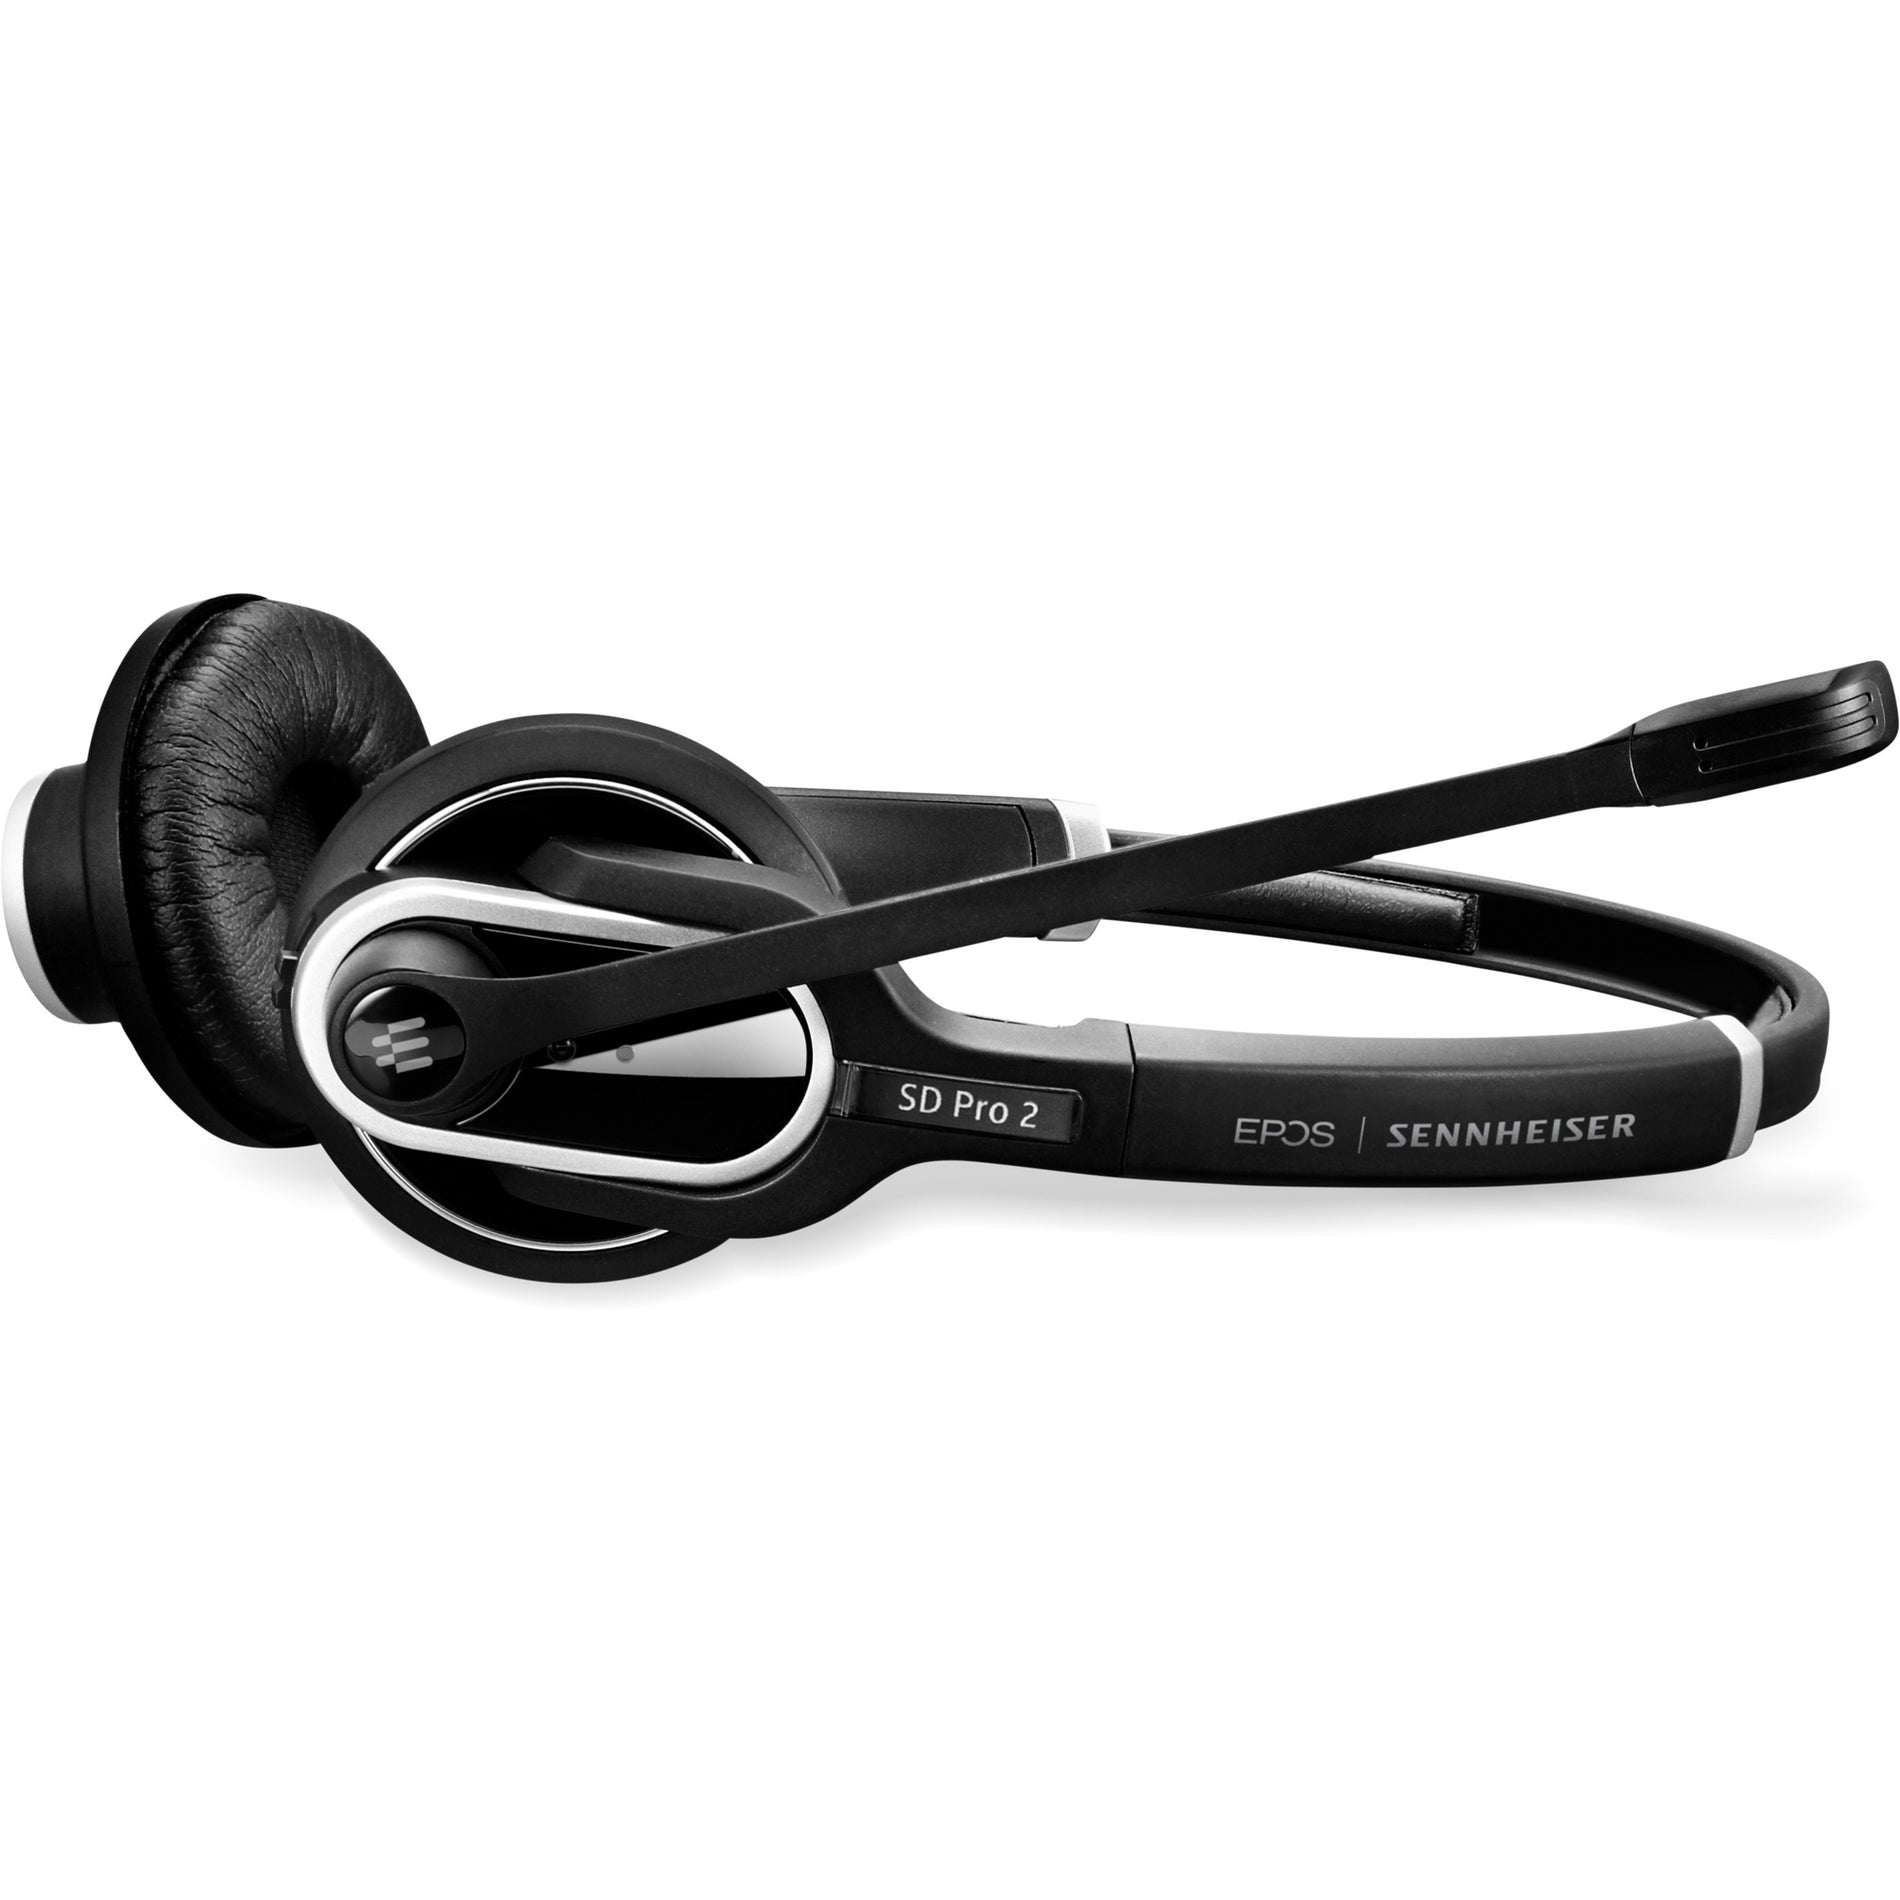 EPOS | SENNHEISER 1000560 IMPACT SD 30 HS Headset, Wireless DECT On-ear Stereo Headset with Bi-directional Noise Cancelling Microphone